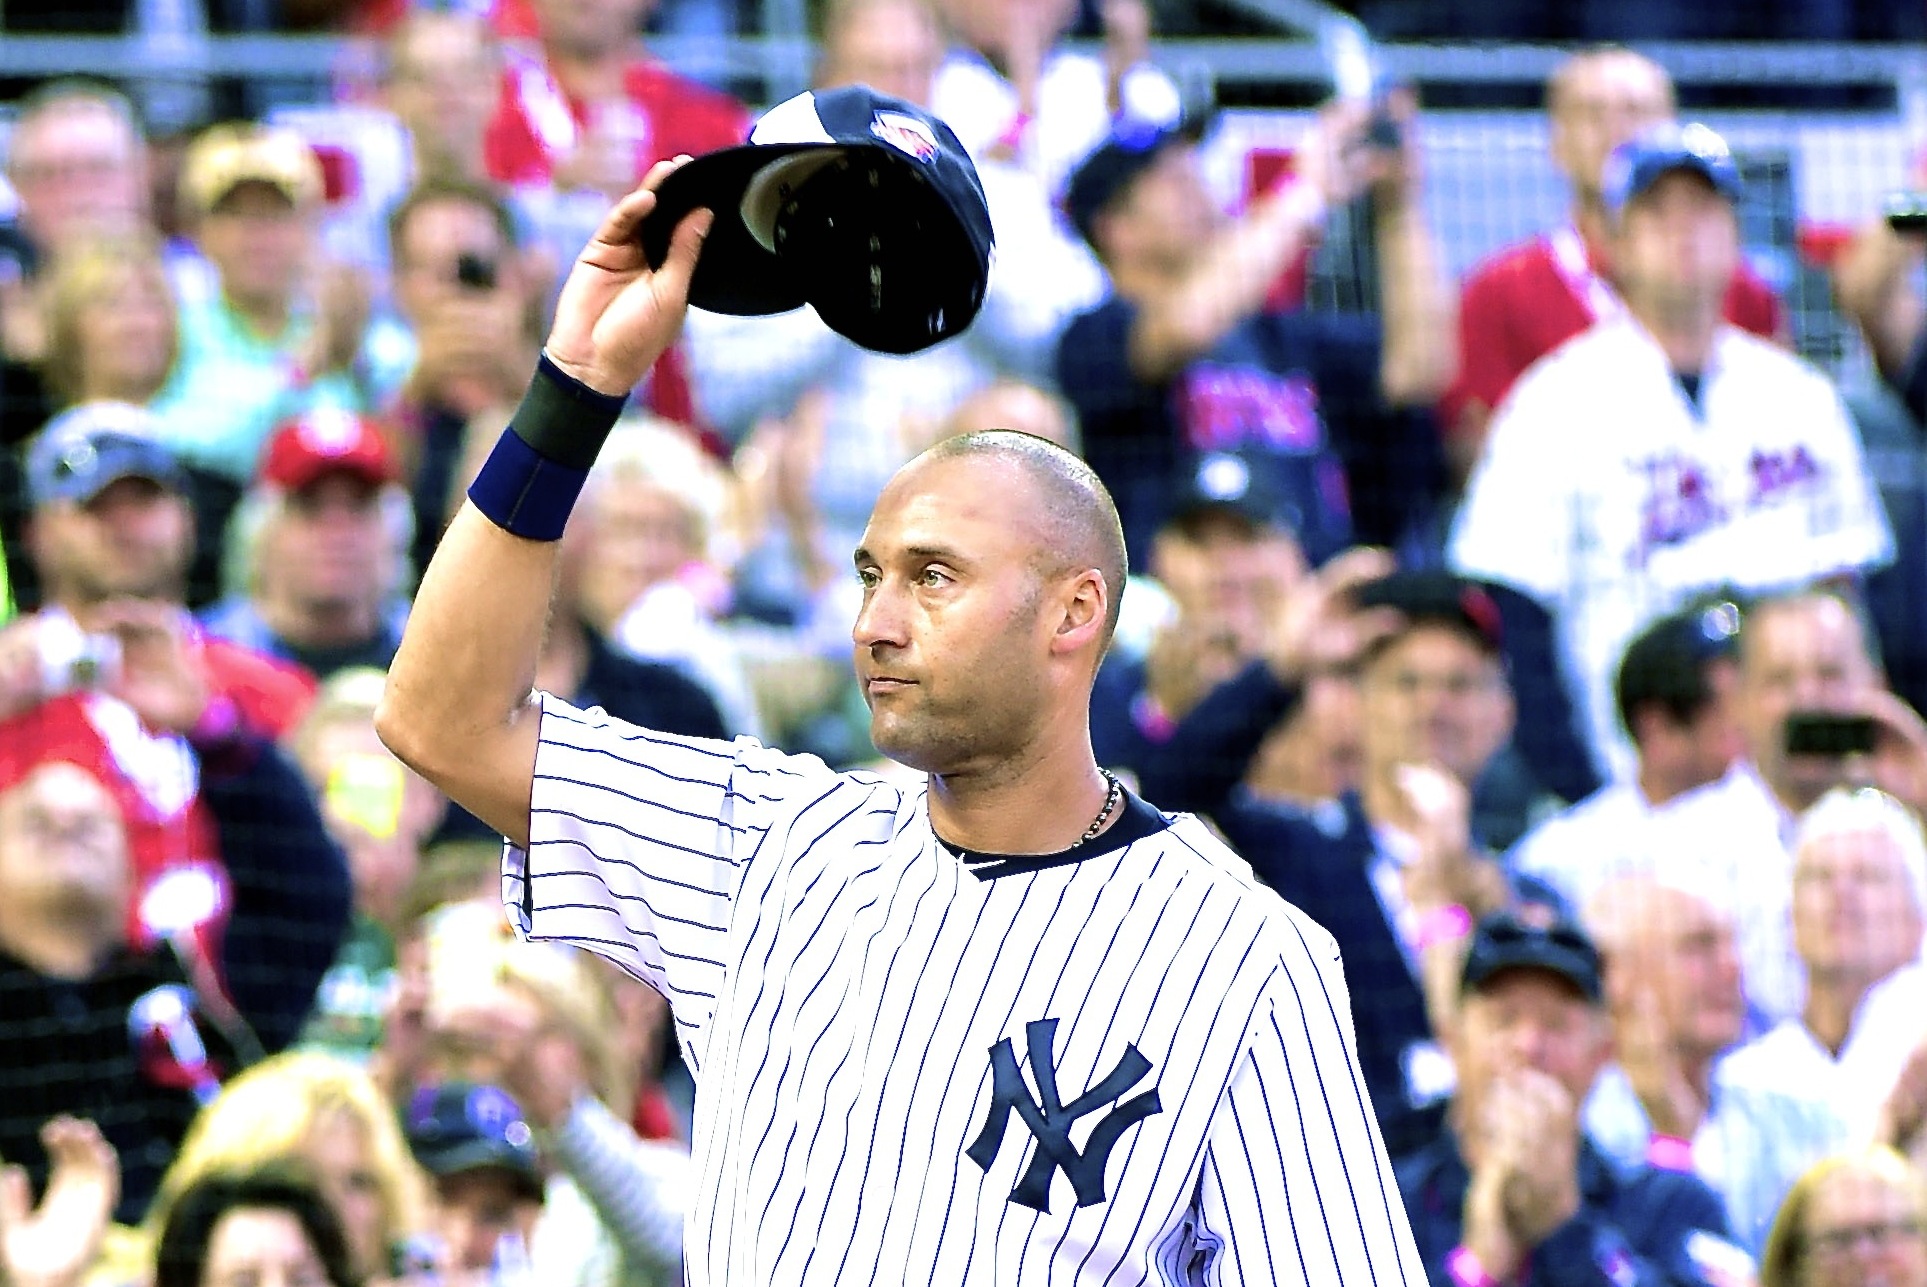 All-Star farewell: Jeter takes bow, hits double – thereporteronline